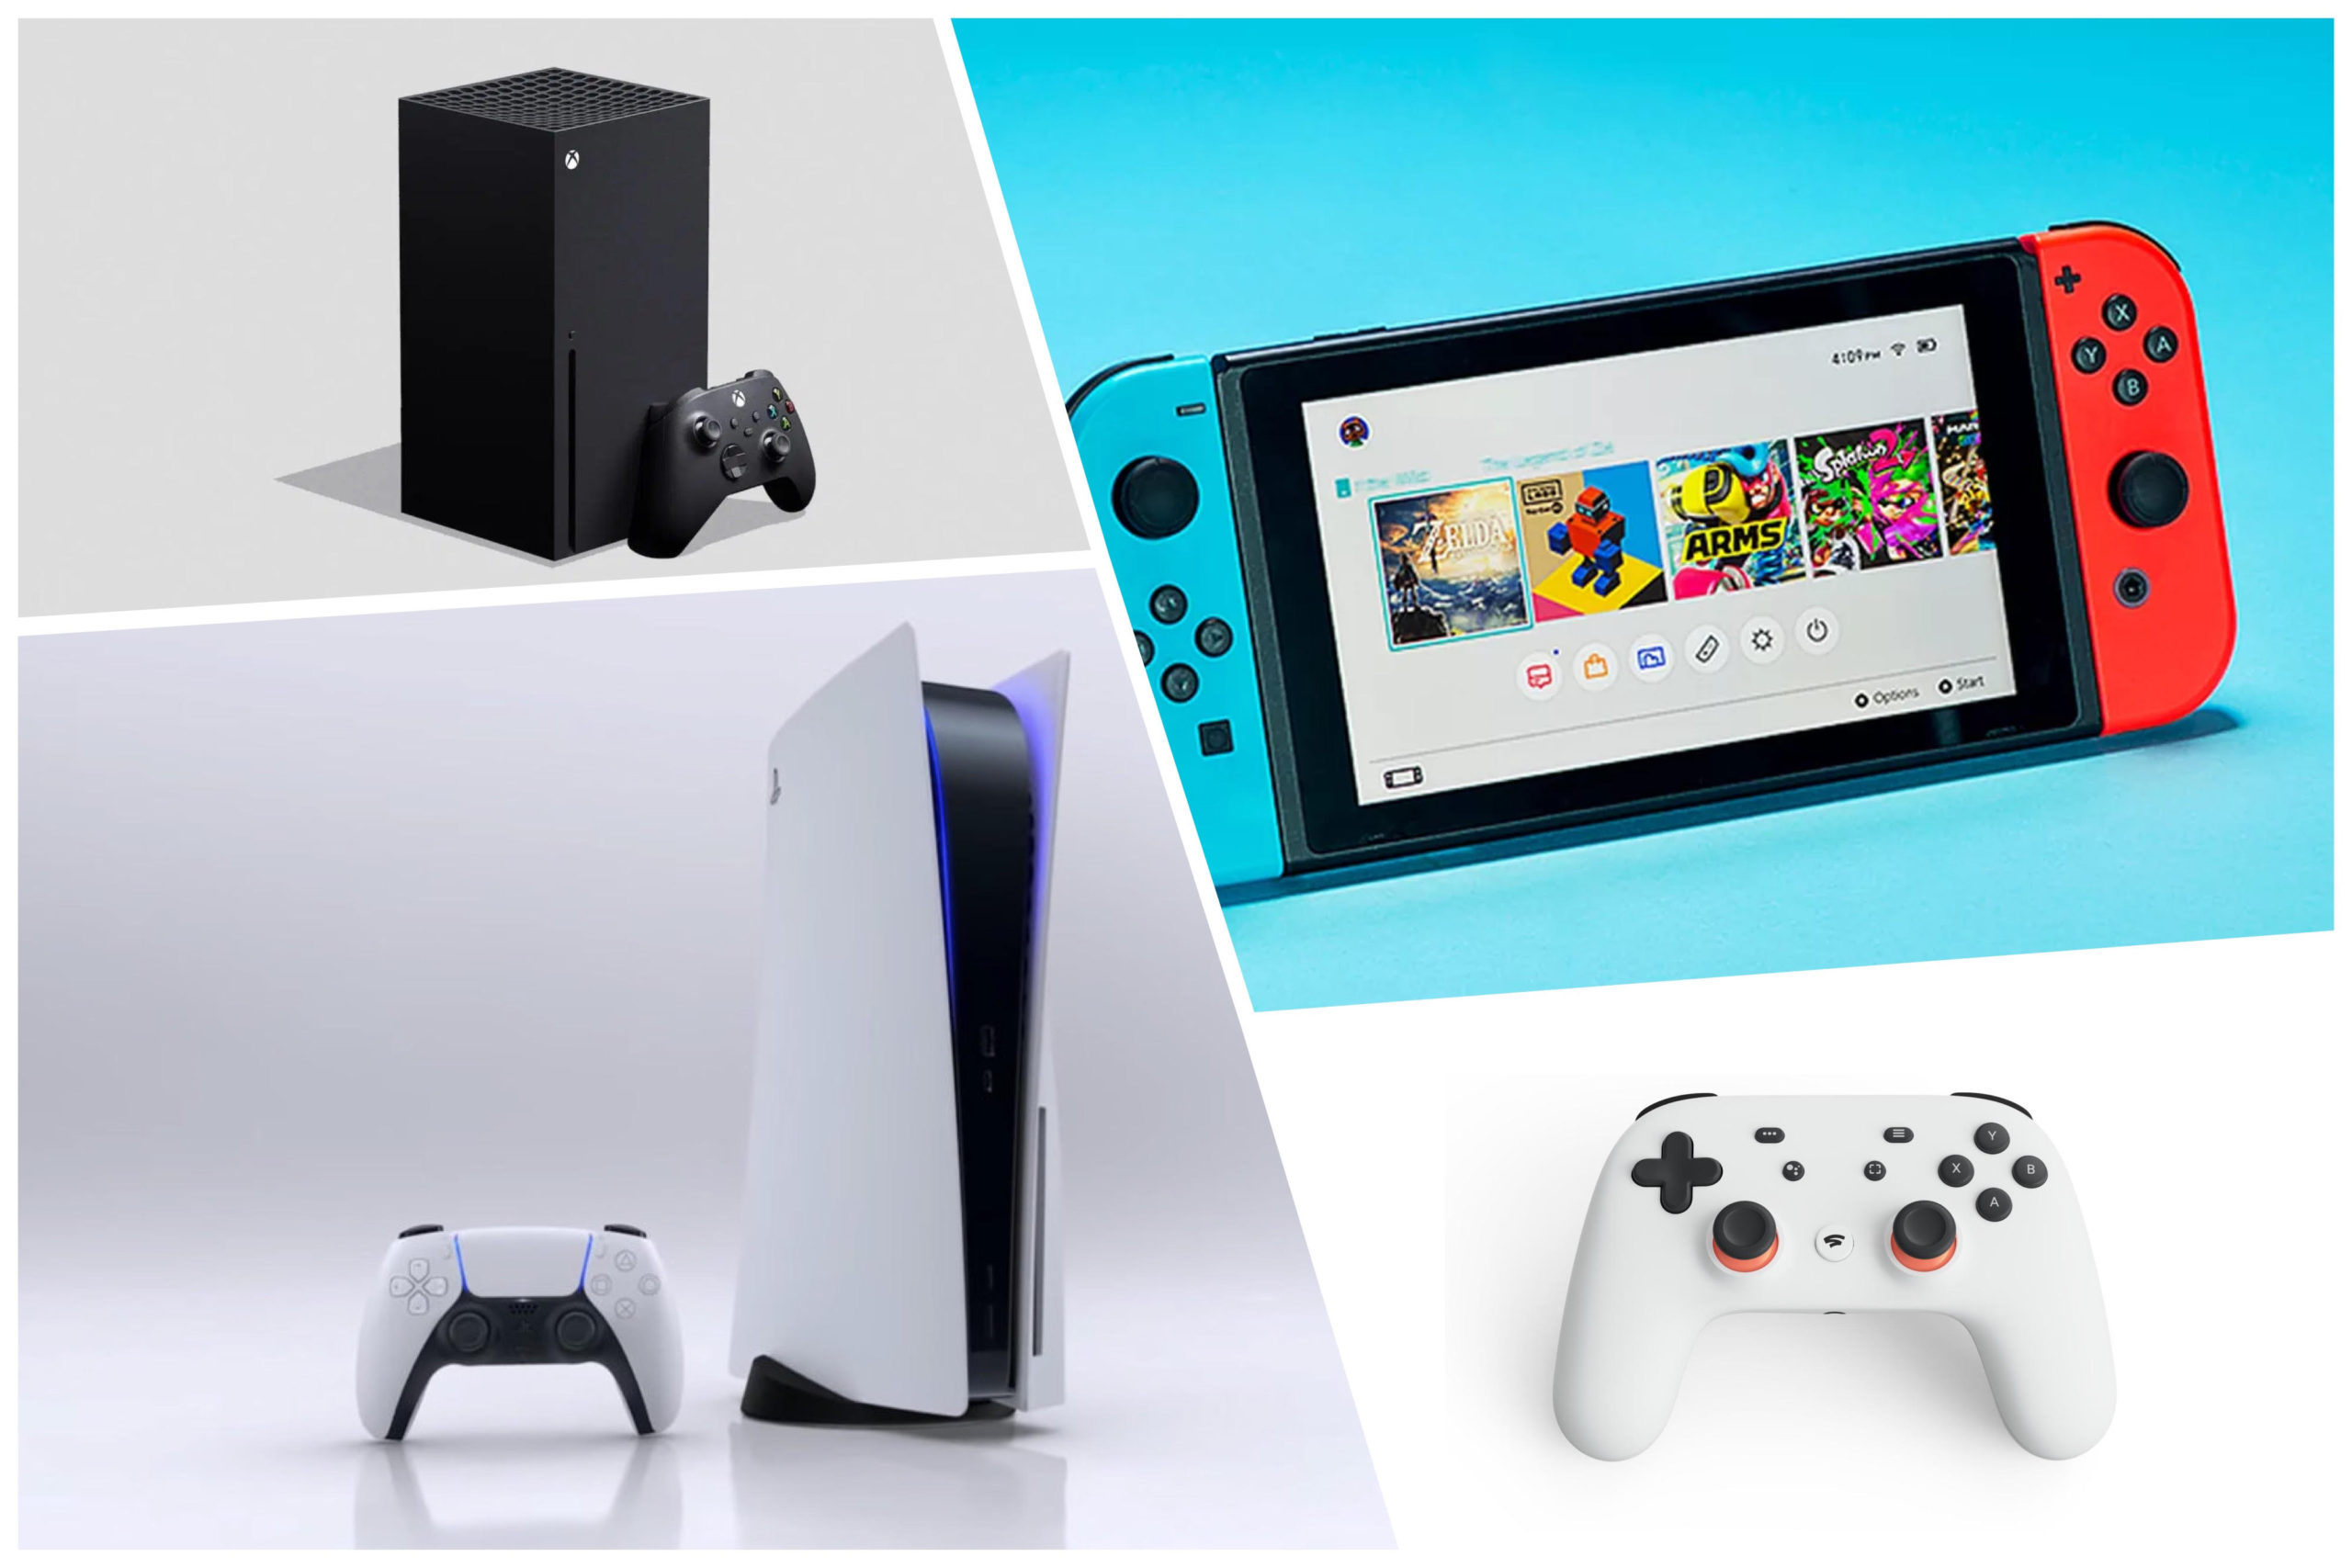 2020 gaming gift guide: PS5, Xbox Series X, Nintendo Switch